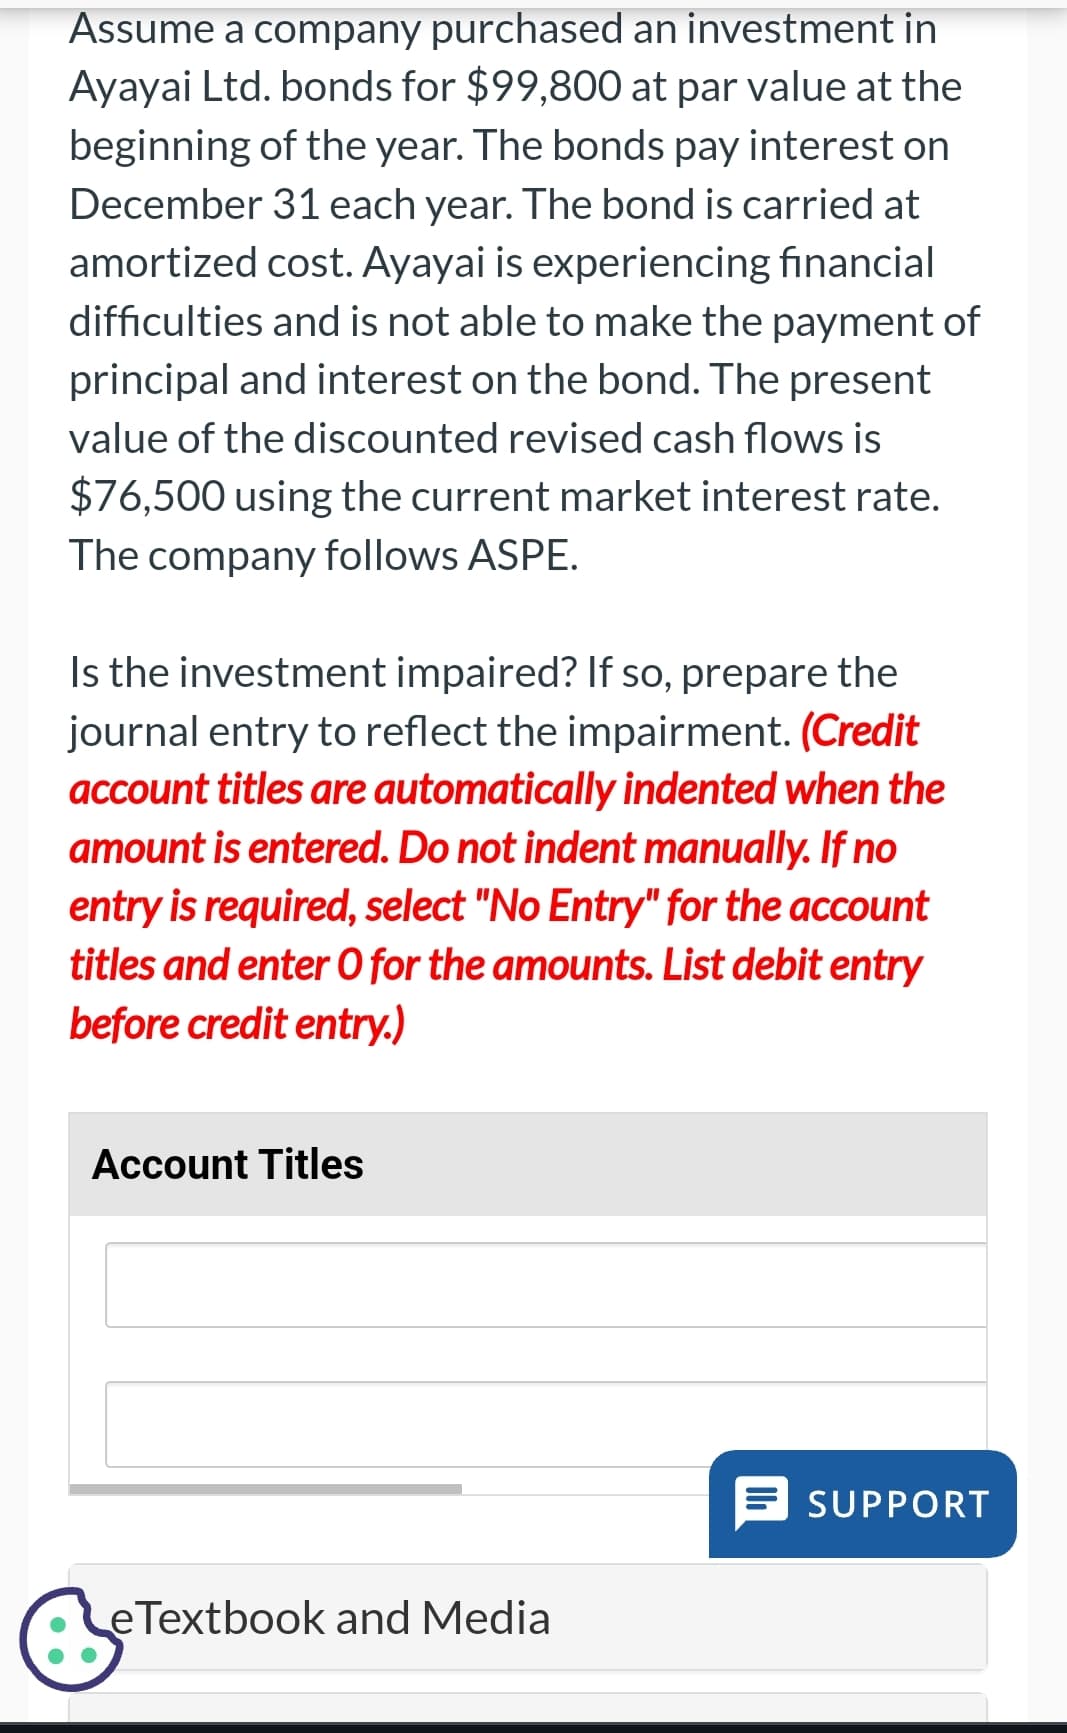 Assume a company purchased an investment in
Ayayai Ltd. bonds for $99,800 at par value at the
beginning of the year. The bonds pay interest on
December 31 each year. The bond is carried at
amortized cost. Ayayai is experiencing financial
difficulties and is not able to make the payment of
principal and interest on the bond. The present
value of the discounted revised cash flows is
$76,500 using the current market interest rate.
The company follows ASPE.
Is the investment impaired? If so, prepare the
journal entry to reflect the impairment. (Credit
account titles are automatically indented when the
amount is entered. Do not indent manually. If no
entry is required, select "No Entry" for the account
titles and enter O for the amounts. List debit entry
before credit entry.)
Account Titles
SUPPORT
eTextbook and Media